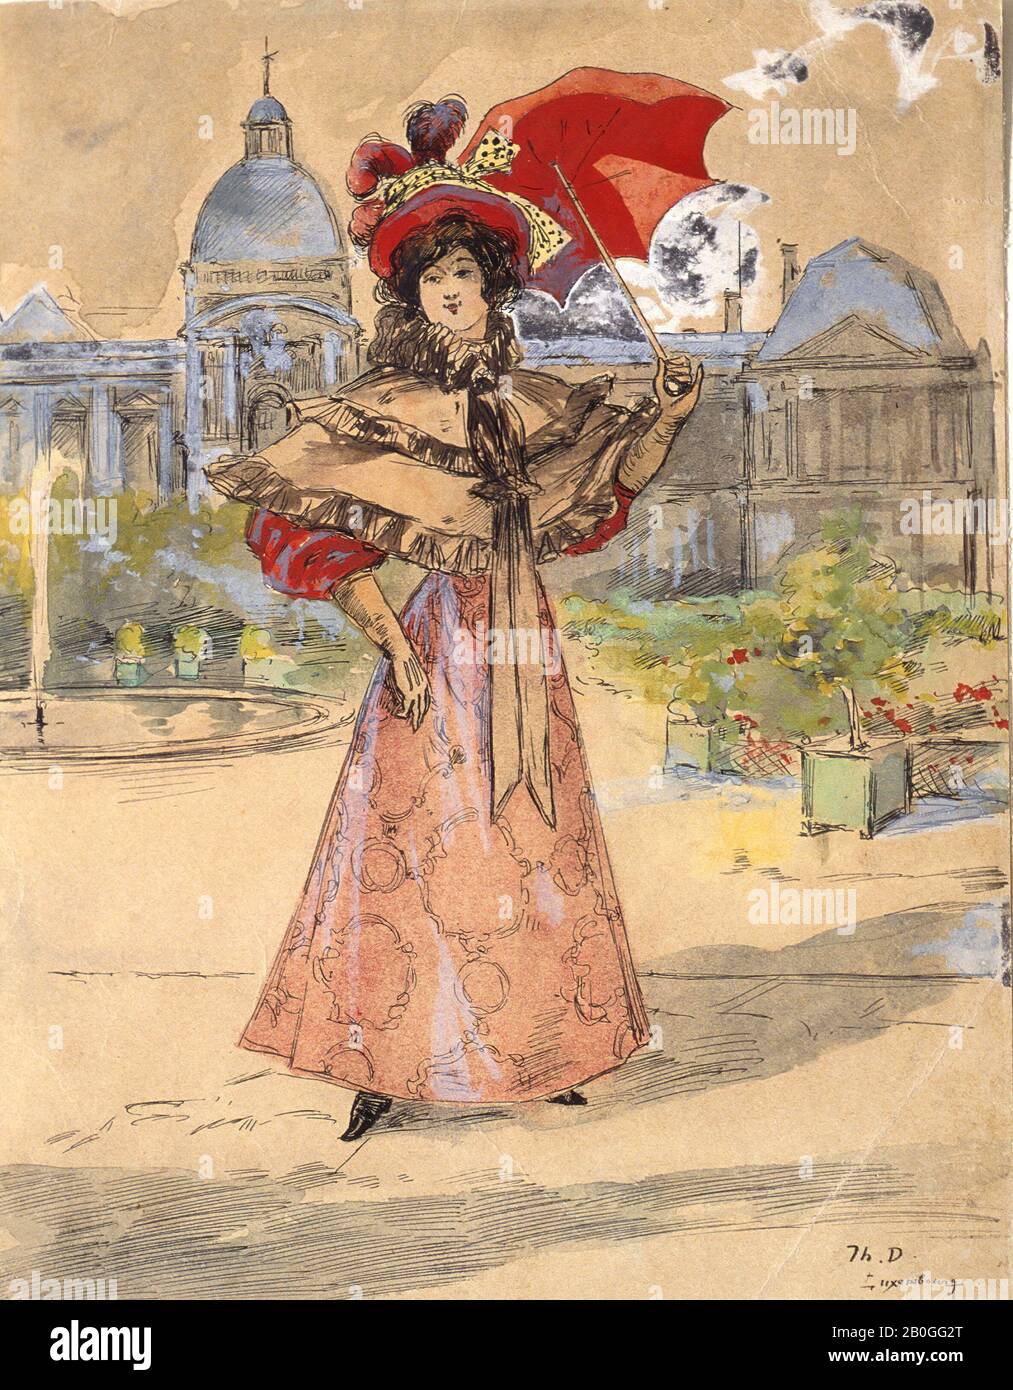 Th. D., French, 19th century, Woman in the Luxembourg Gardens, 19th Century, Pen and black ink, watercolor, and gouache heightened with white on paper, Overall: 9 1/8 x 7 1/8 in. (23.2 x 18.1 cm Stock Photo